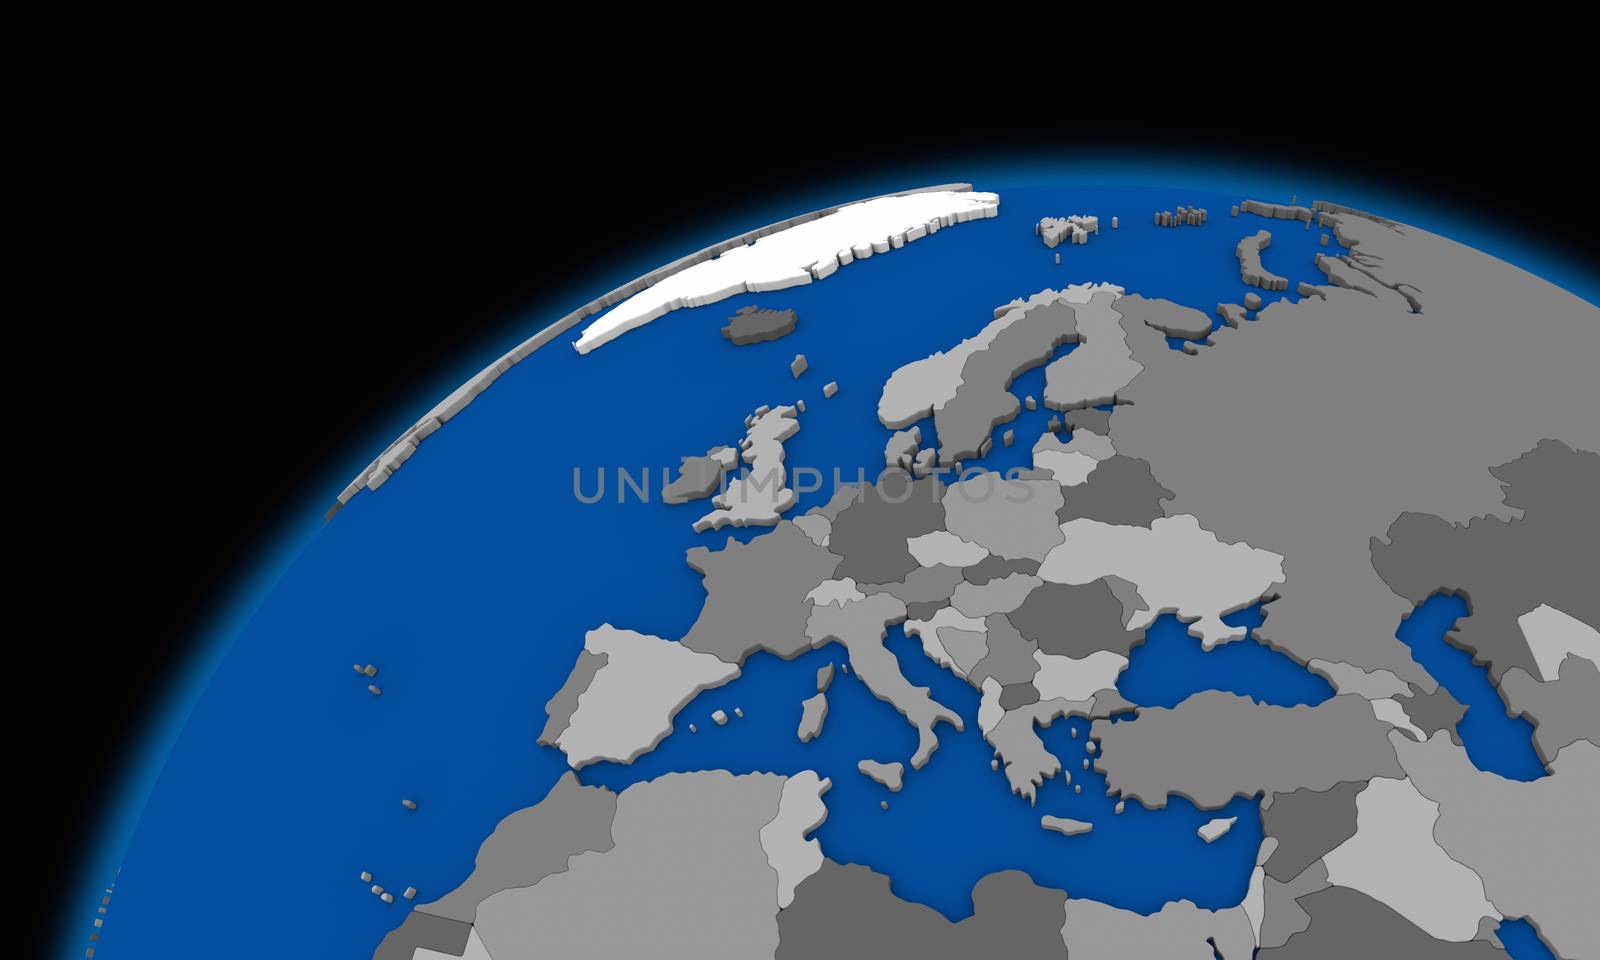 Europe on planet Earth, political map